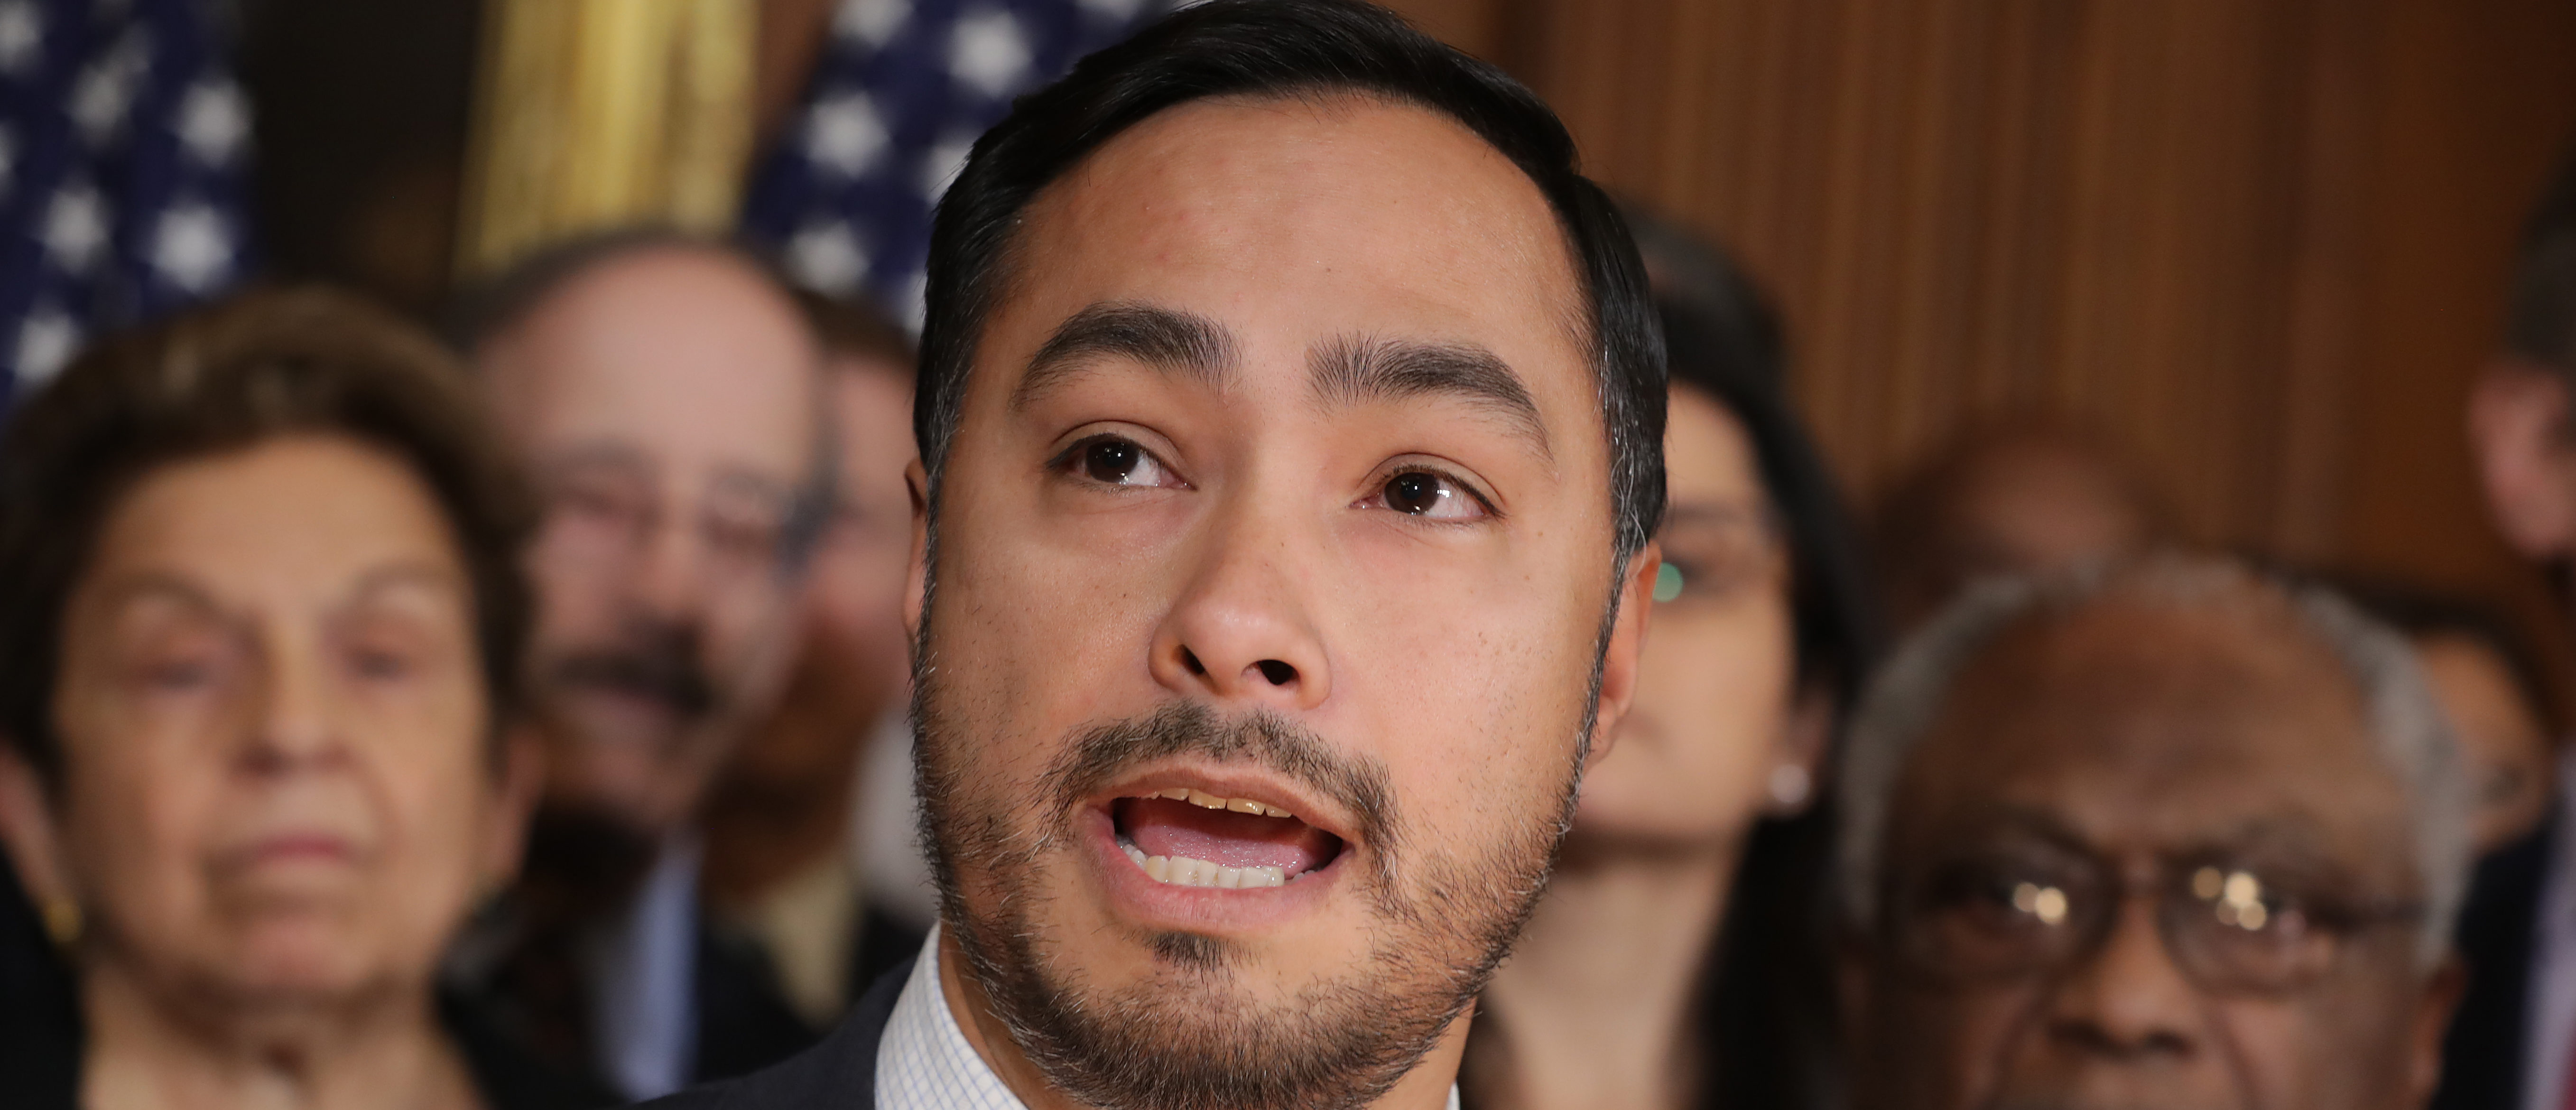 Rep. Joaquin Castro (D-TX) speaks during a news conference about the resolution he has sponsored to terminate President Donald Trump's emergency declaration February 25, 2019 in Washington, DC. (Chip Somodevilla/Getty Images)